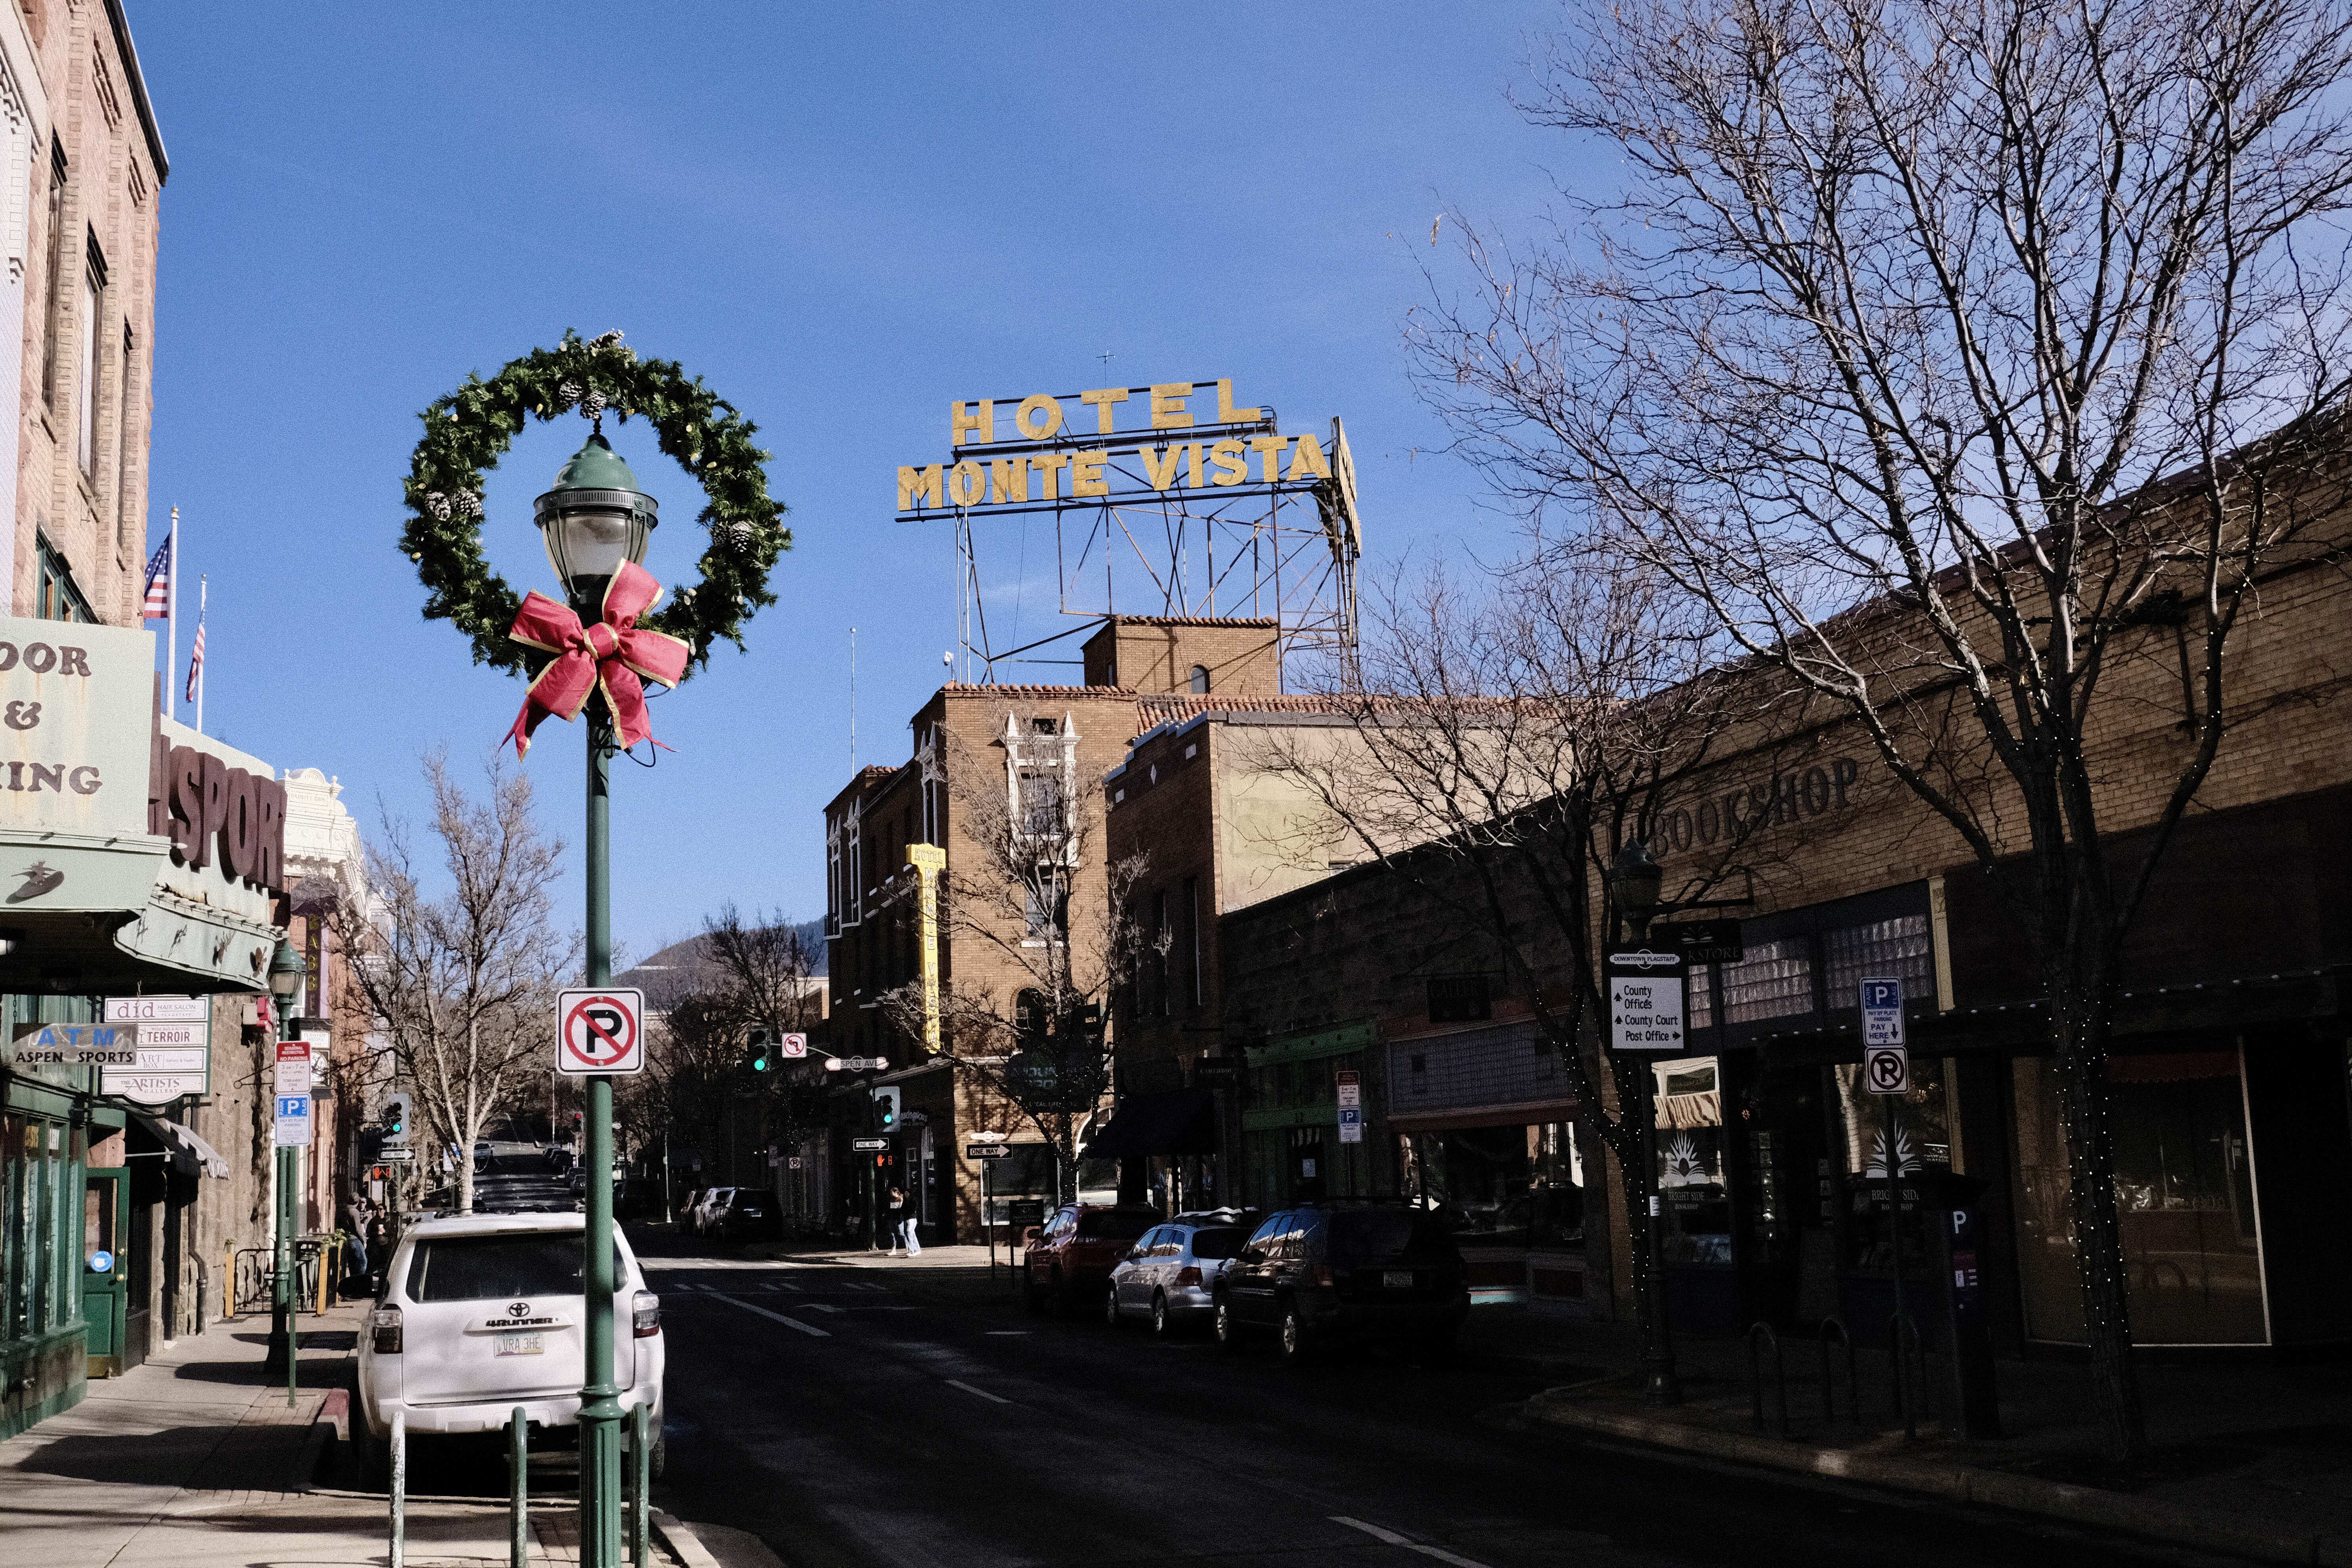 looking up a street sided by brick buildings, to see a large green and red wreath, and the sign for the Hotel Monte Vista high above the street 